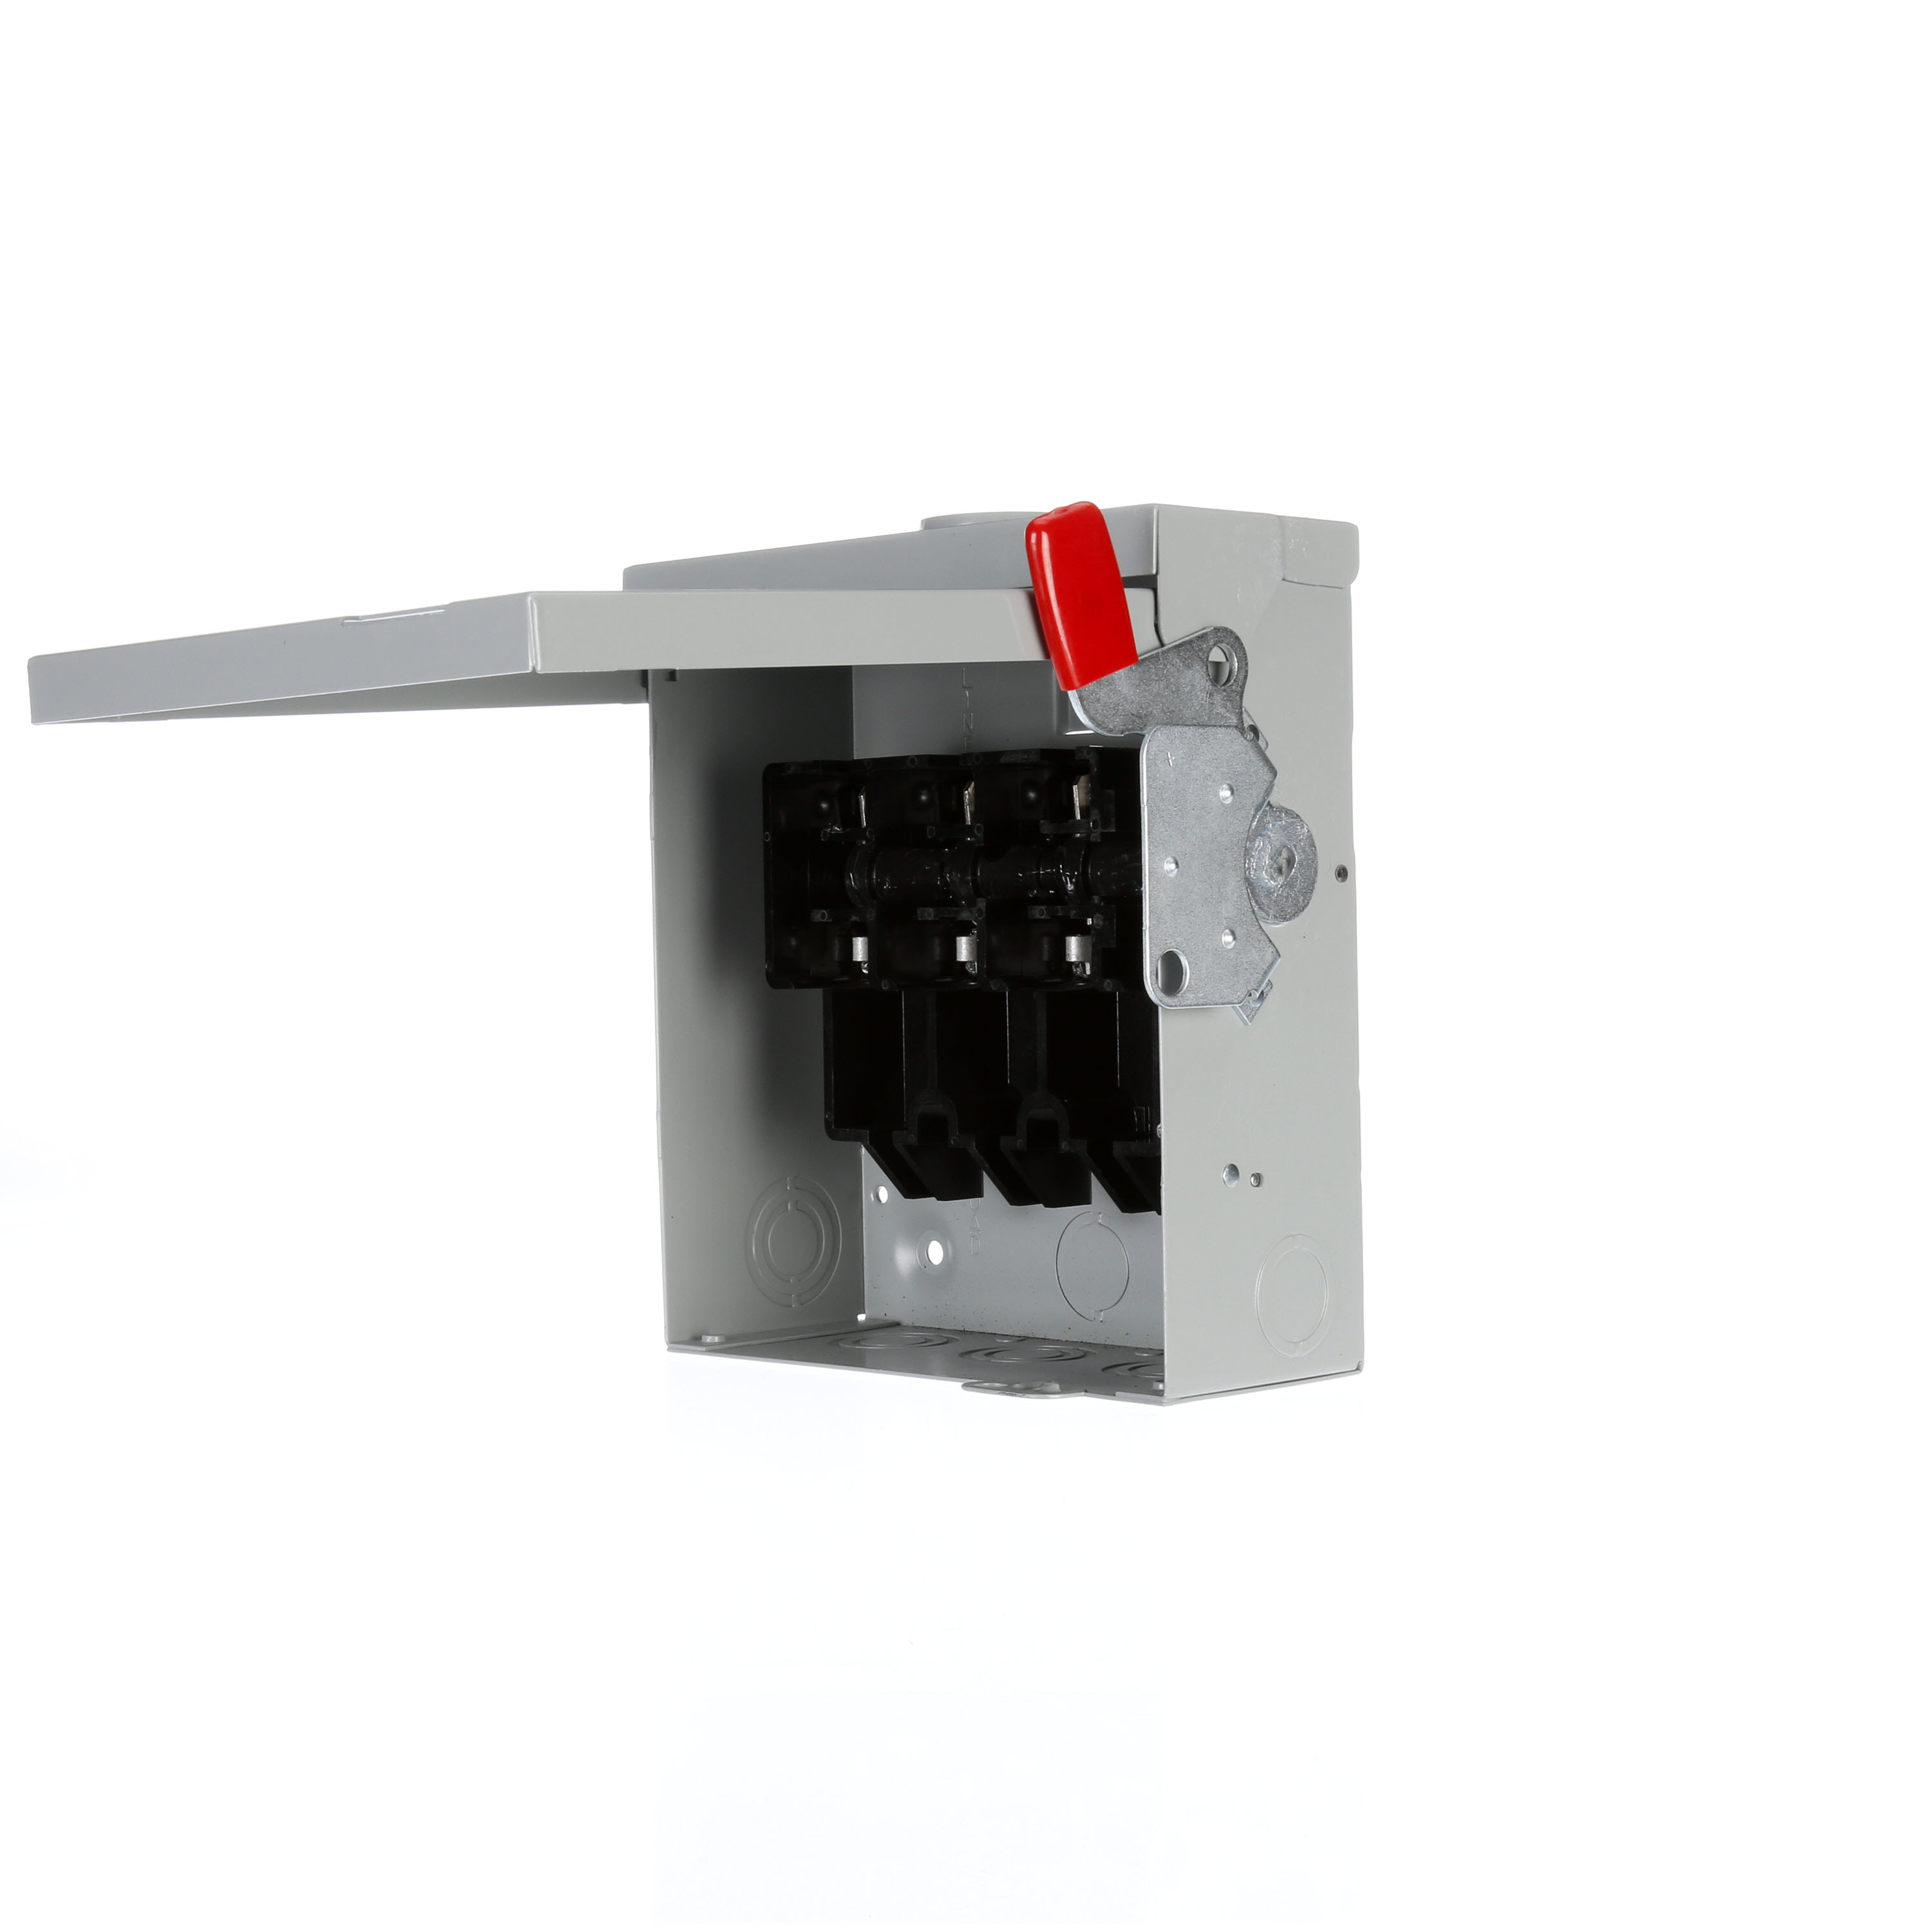 Siemens Low Voltage Circuit Protection General Duty Safety Switch. 2-Pole or 3-Pole Non-Fused in a type 3R enclosure (outdoor). Rated 240VAC (30A). Horse power1-PH 2-W (3), 3-PH 3-W (7-1/2), 250VDC (5). Special features service entrance labeled suitable for 3-PH motor loads.